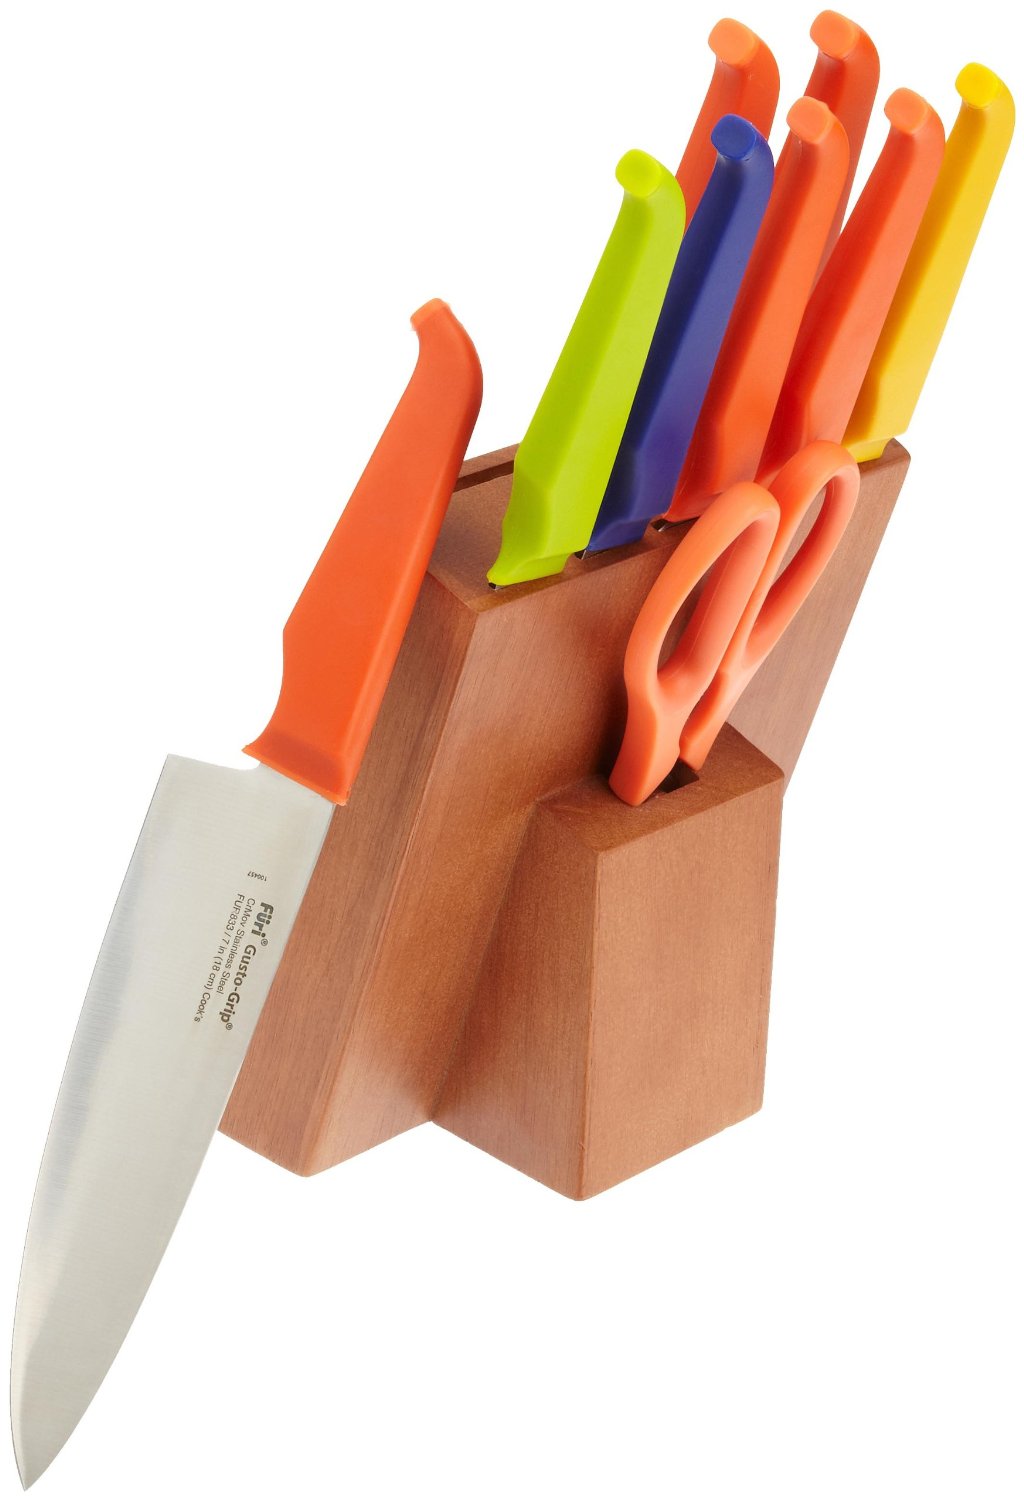 Furi Rachael Ray Gusto-Grip 8-Inch Forged Chef's Rocker Knife Only